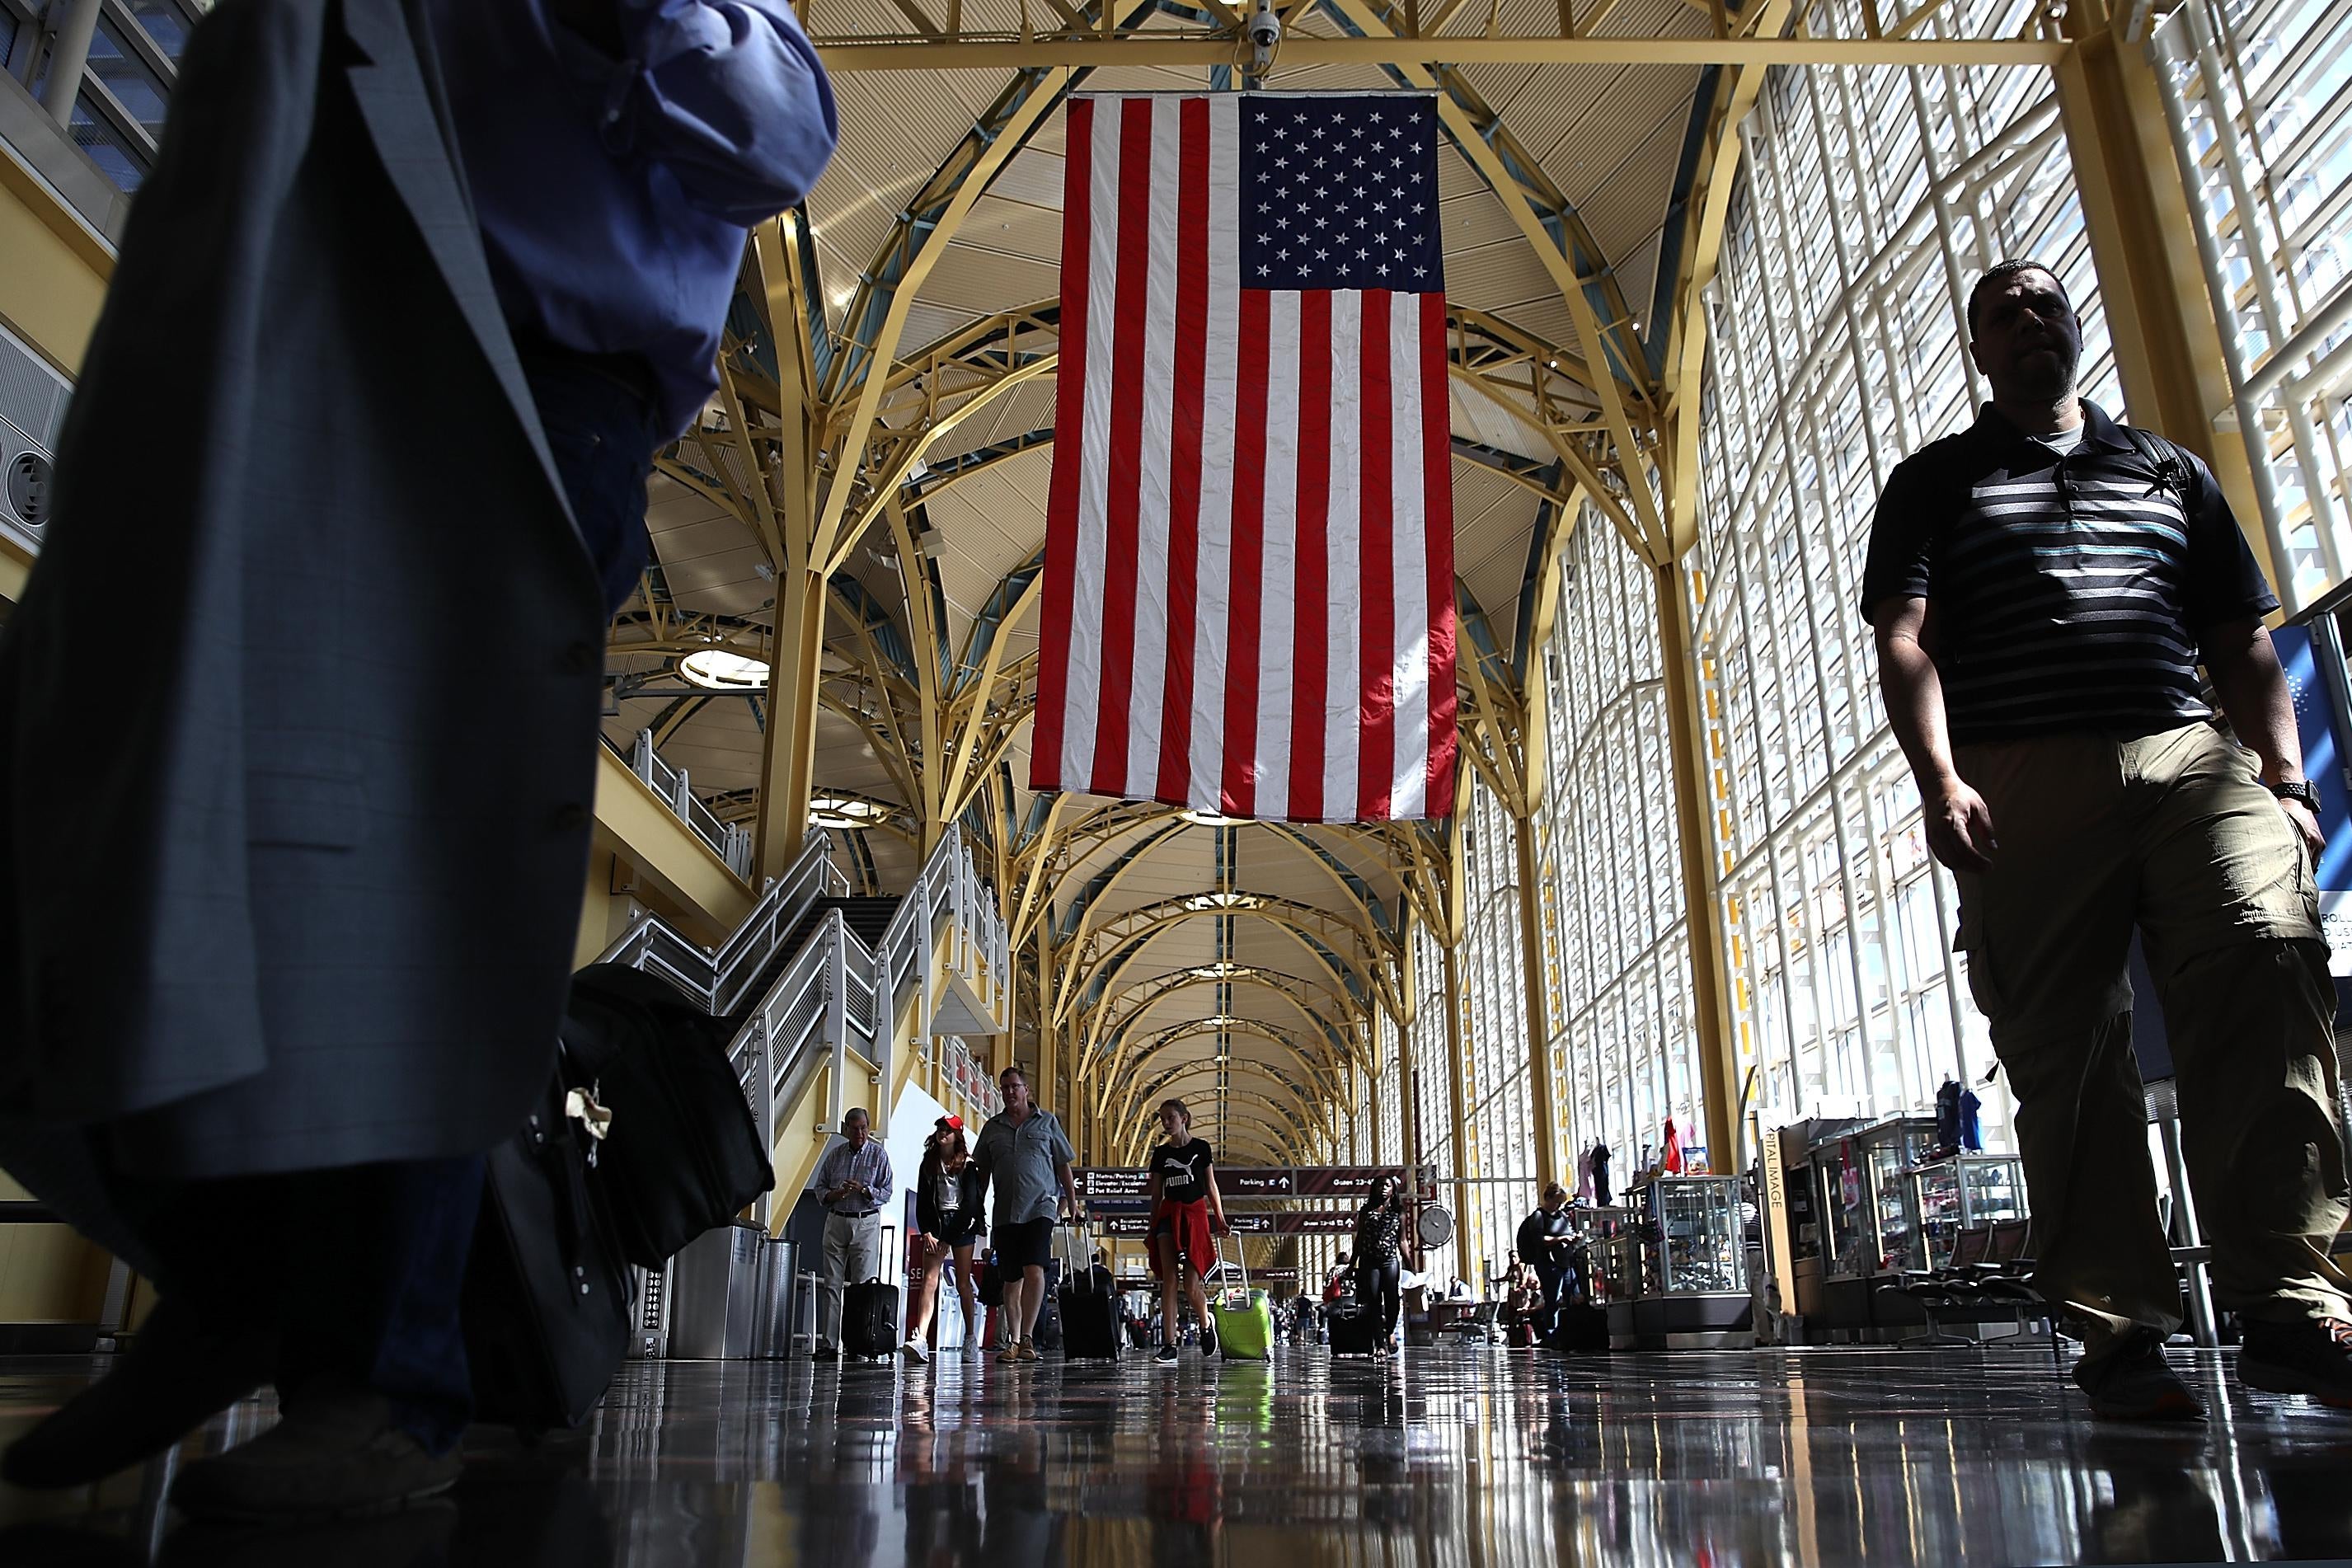 Travelers walk to their gates in the concourse of Reagan National Airport in Washington.